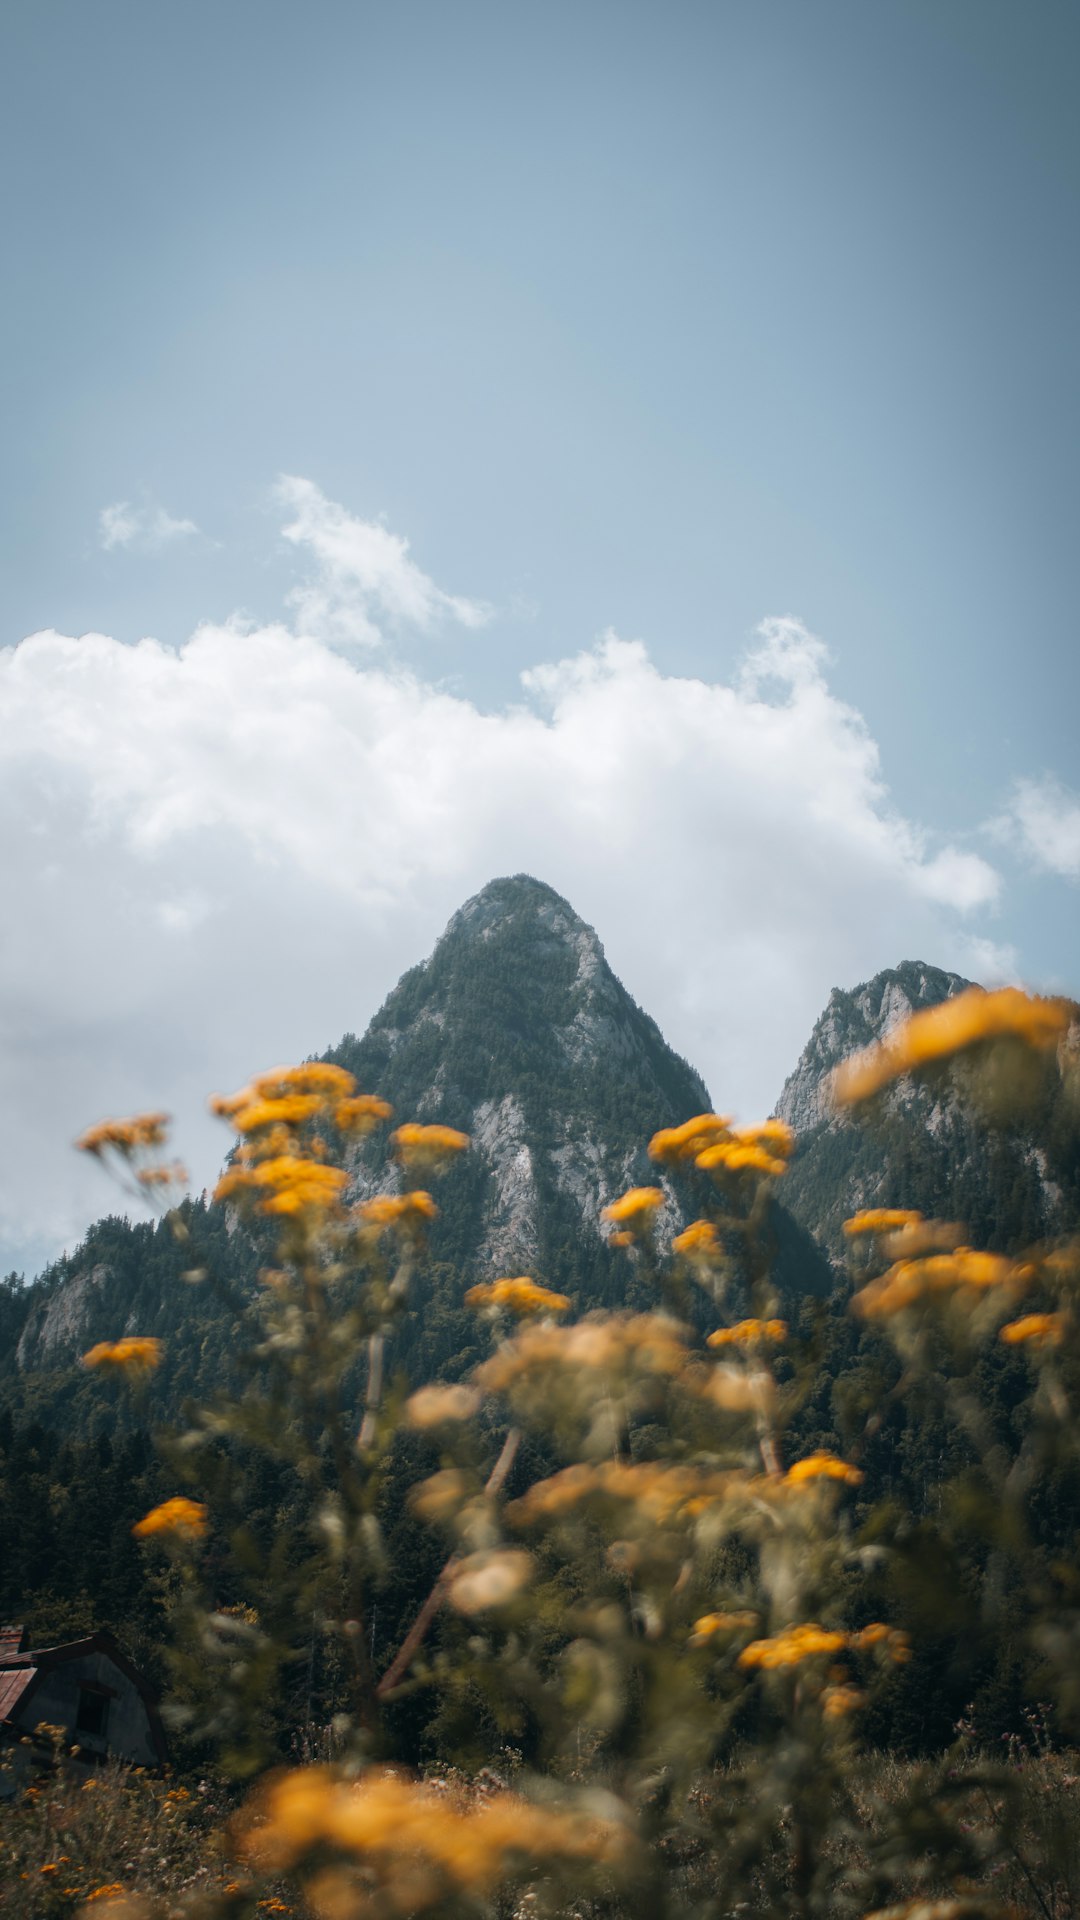 yellow flowers near mountain under white clouds and blue sky during daytime